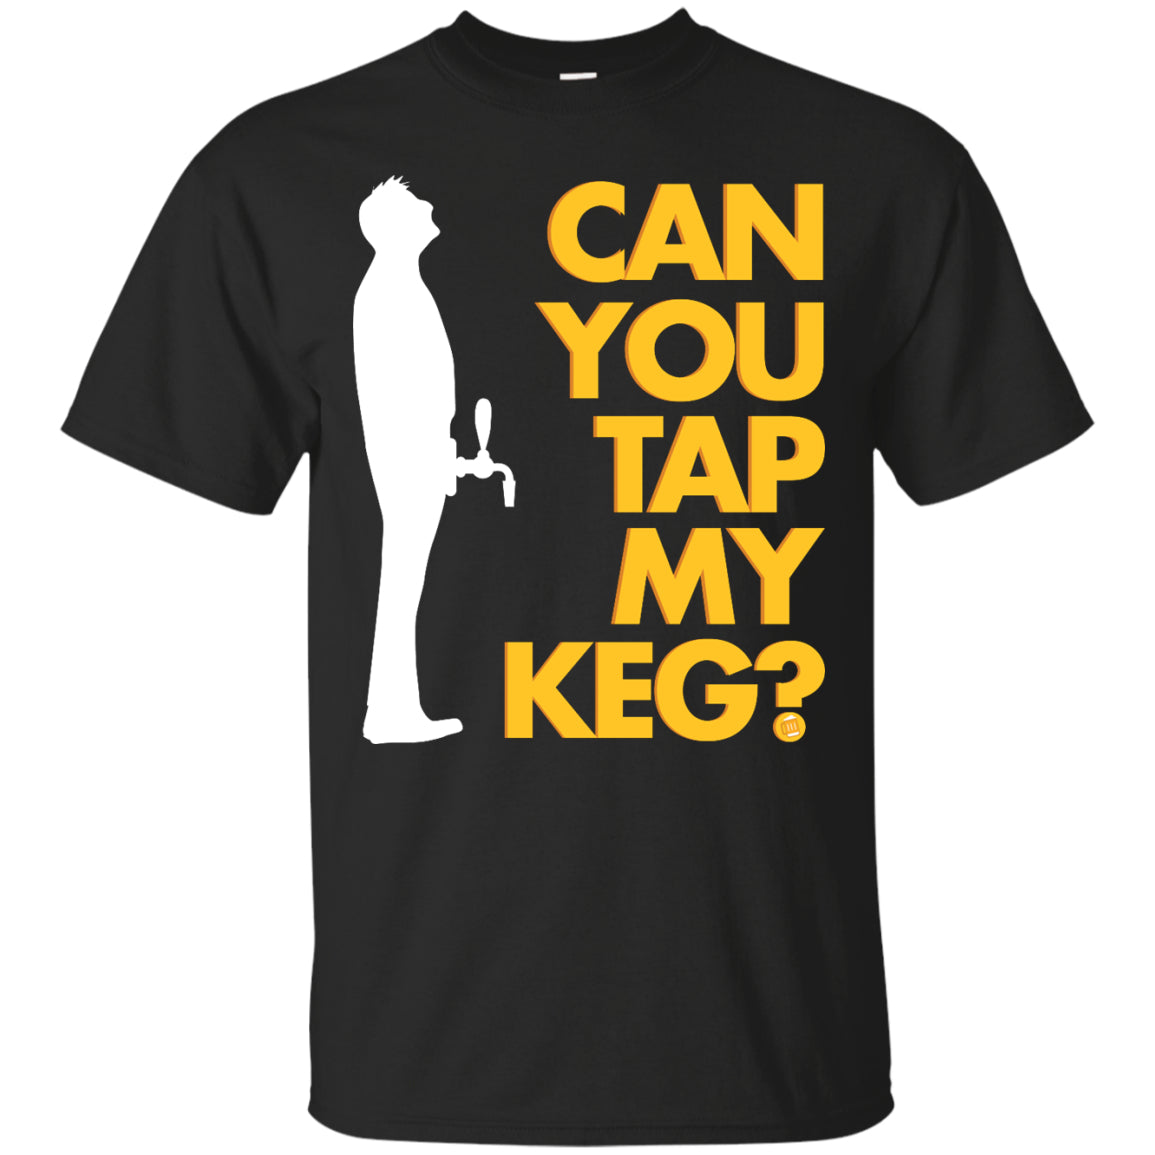 Can You Tap My Keg? T-Shirt Apparel - The Beer Lodge